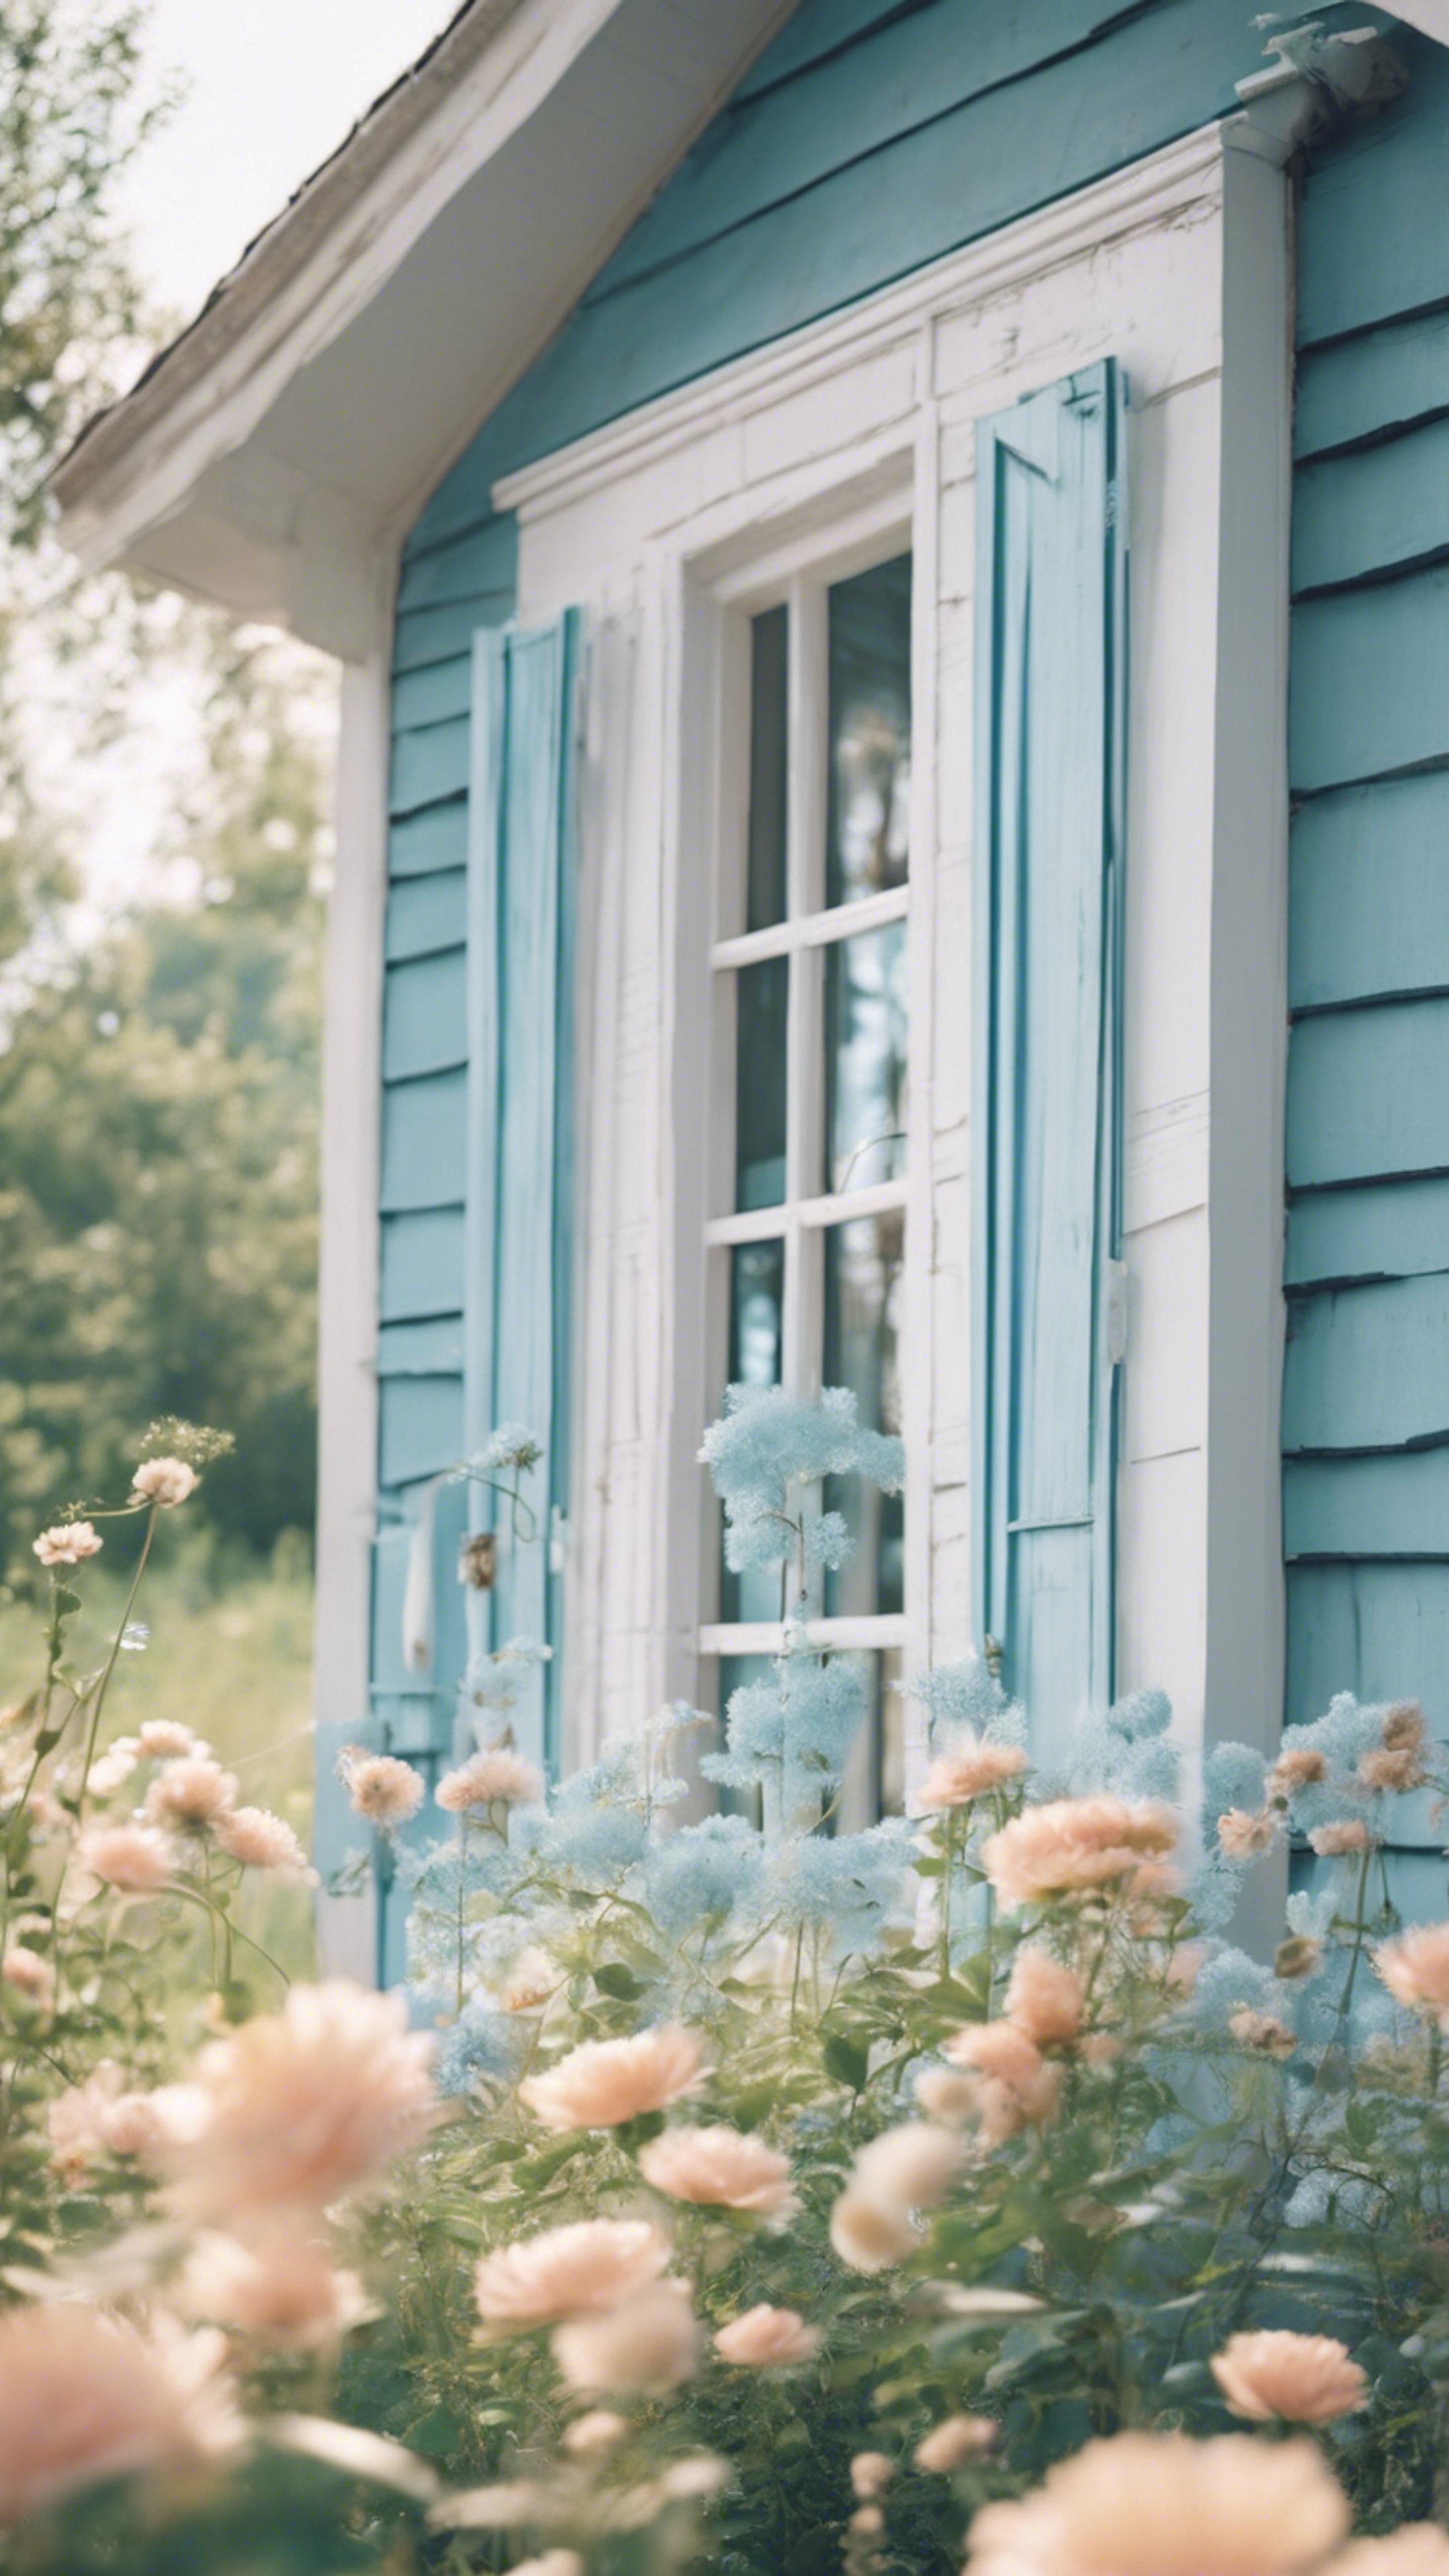 Preppy pastel blue summer farmhouse with white wooden windows. Tapeta[48dc49ad1a9b4a7c9166]